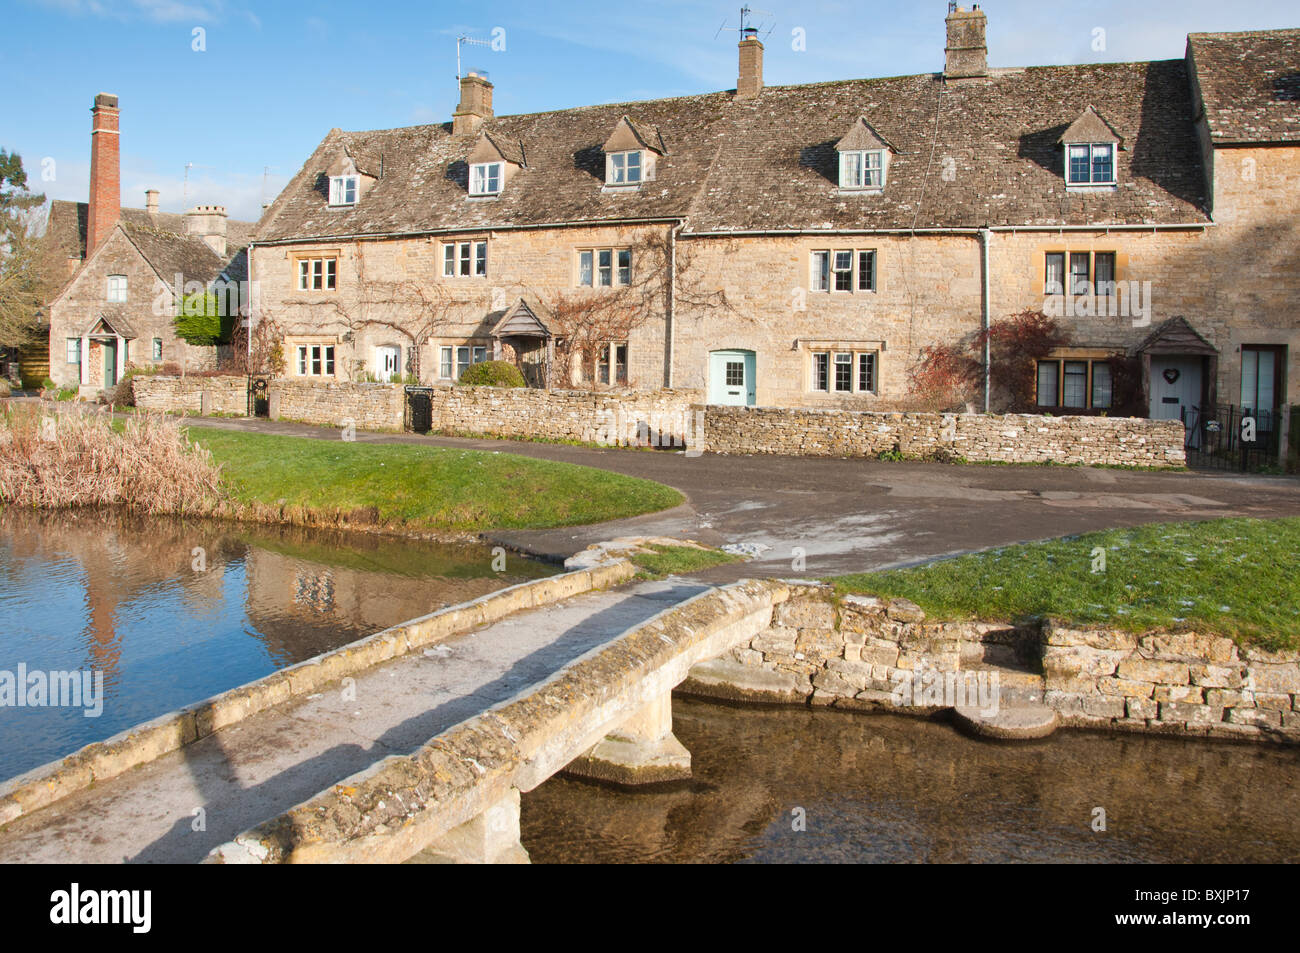 The scenic Cotswold village of Lower Slaughter in Gloucestershire, England. Stock Photo